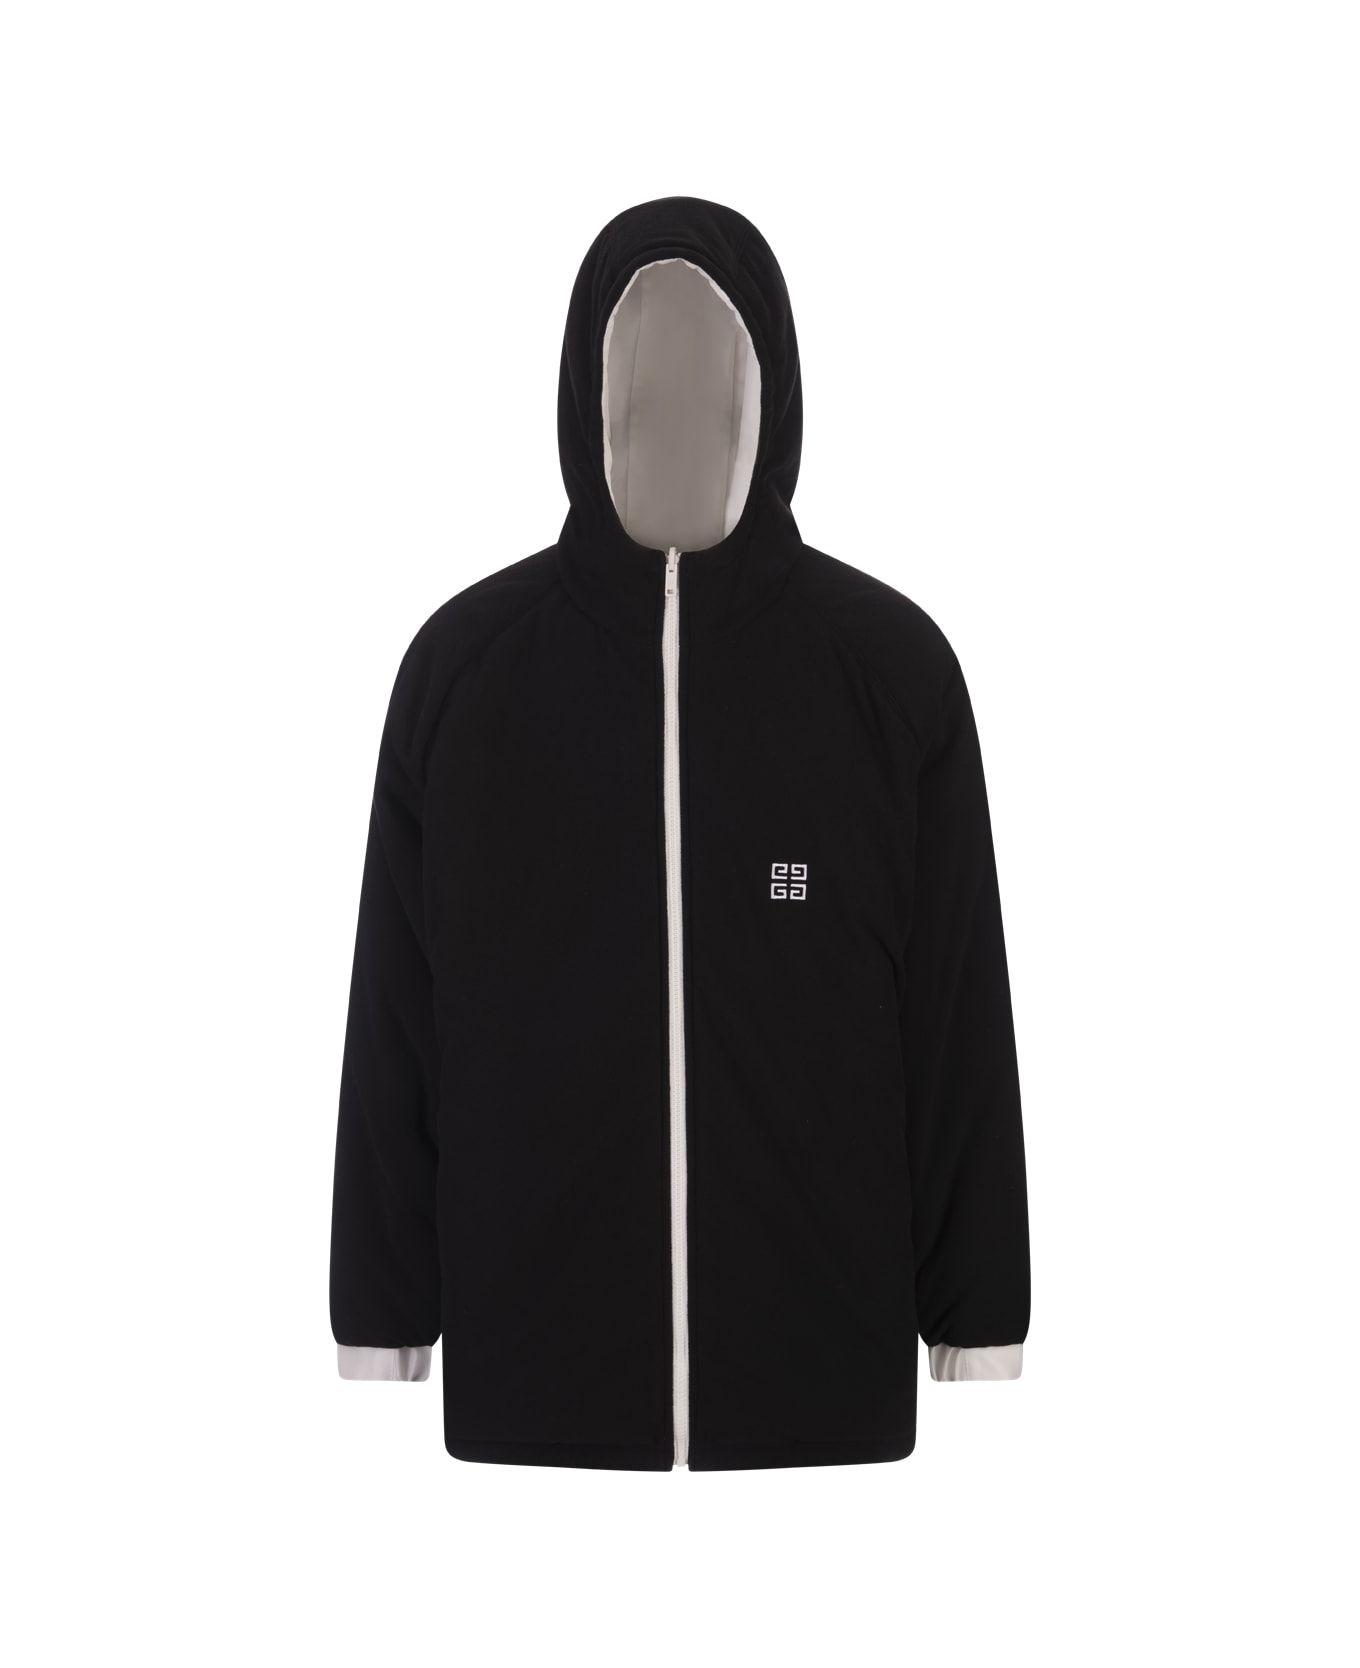 Givenchy Black/white Givenchy Reversible Football Parka In Fleece - White コート